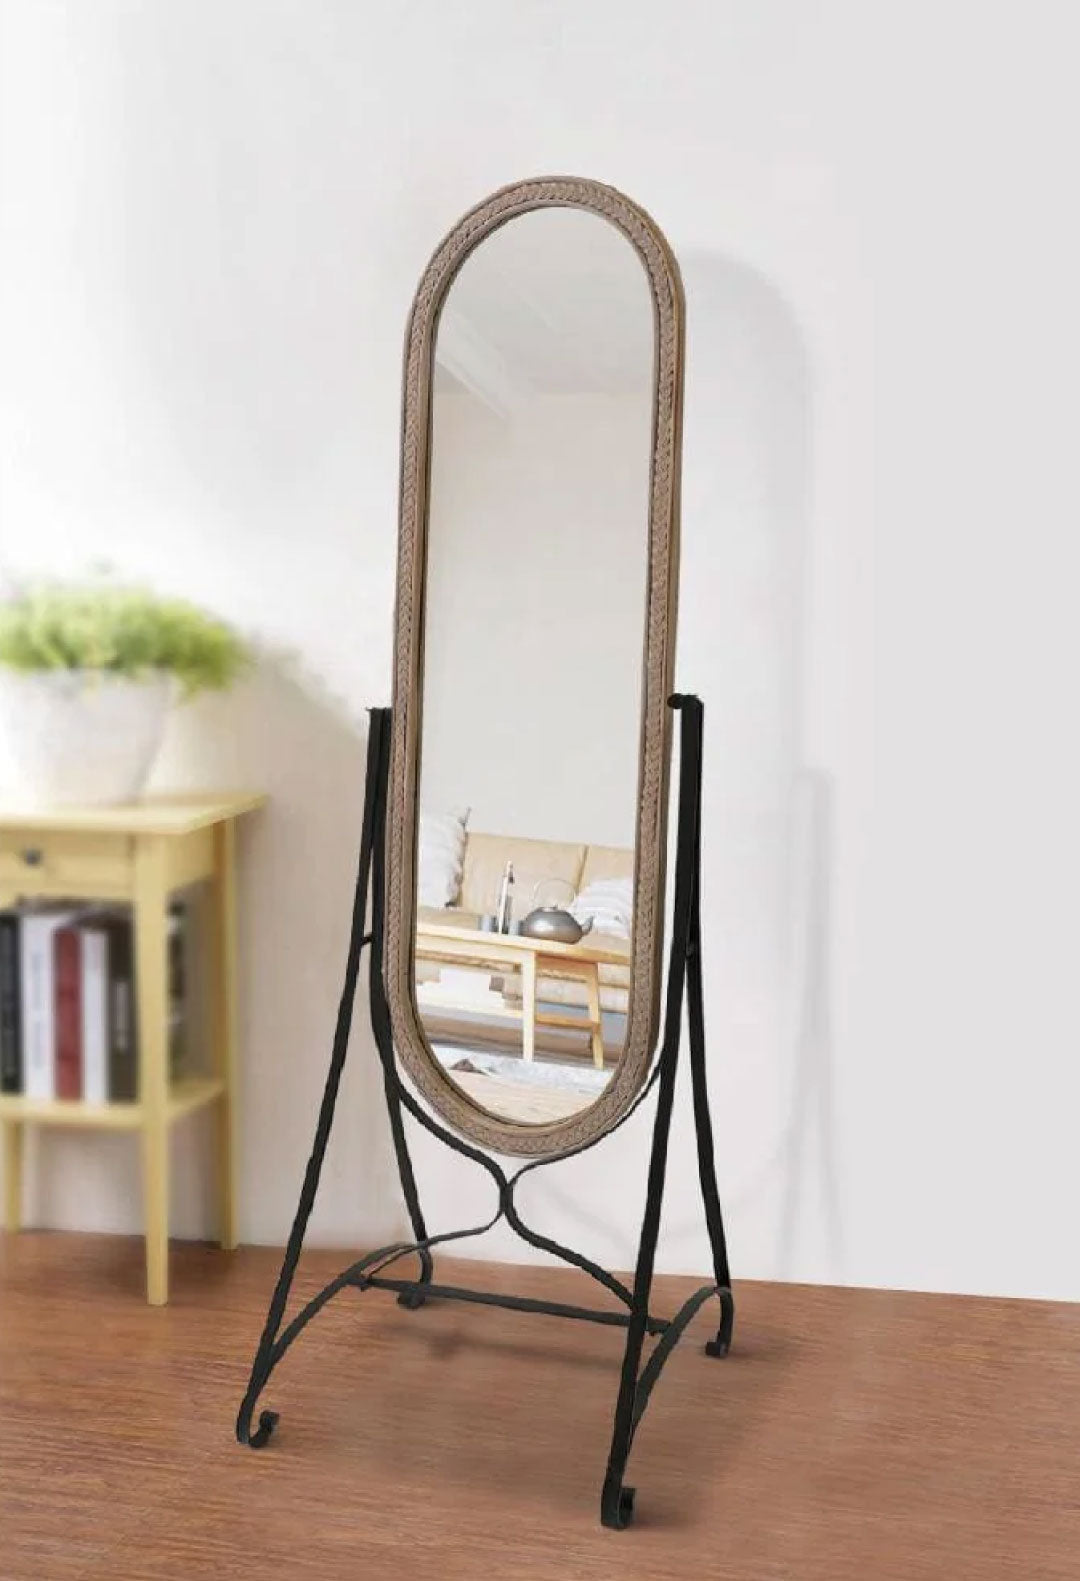 64 Inch Tall Adjustable Cheval Mirror